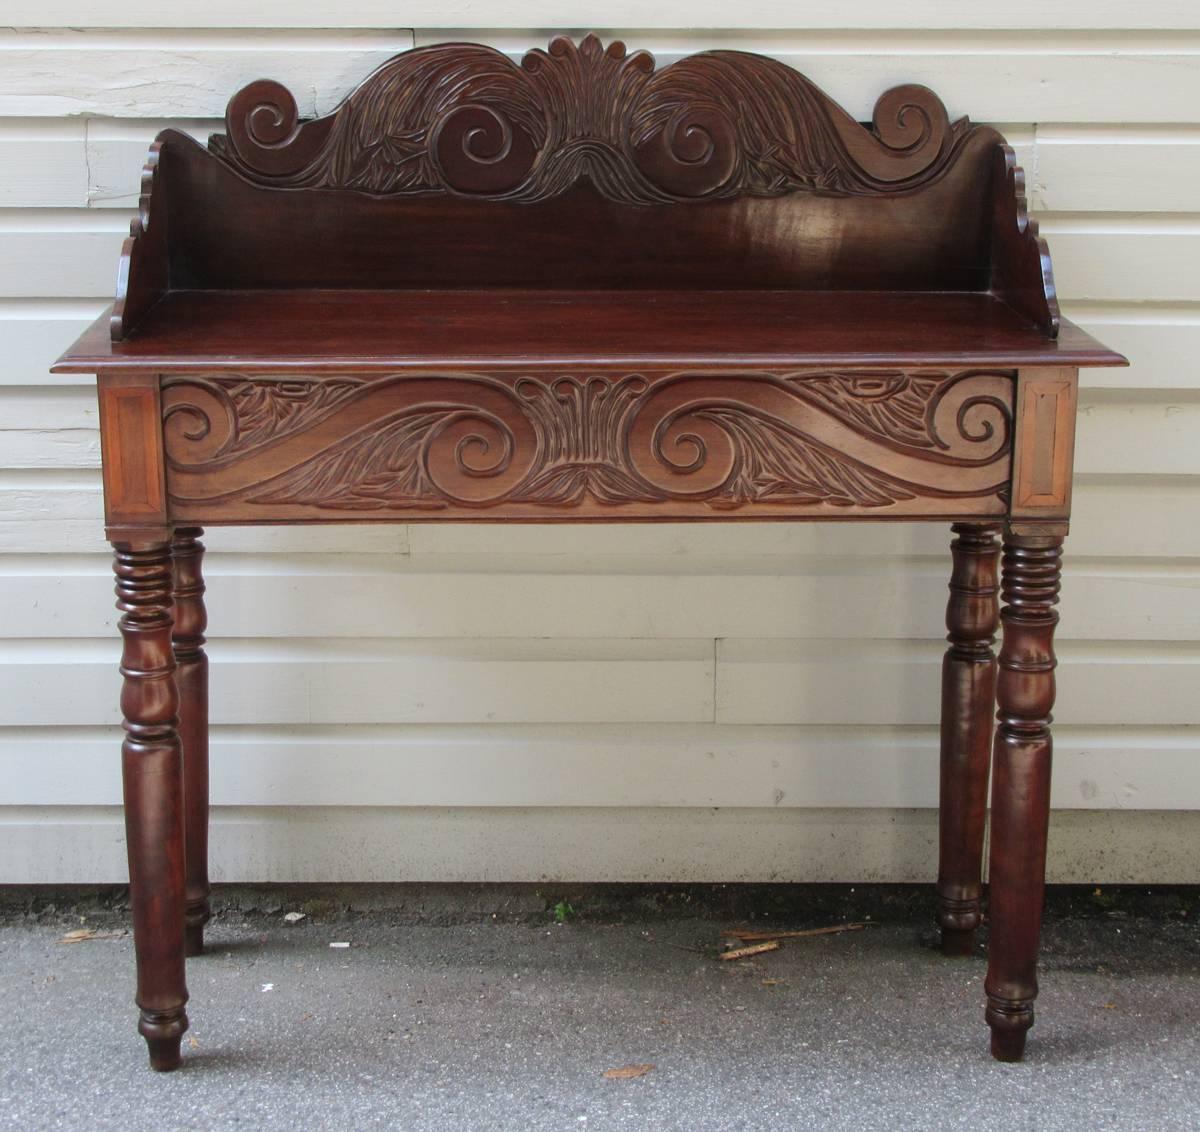 This Caribbean solid mahogany with satinwood inlay vernacular sideboard is made in Jamaica, circa 1820-1840. It is one of the Rare Jamaican Regency Sideboards that exhibits an unusual exuberant carved frontal frieze with the decorative motif echoed